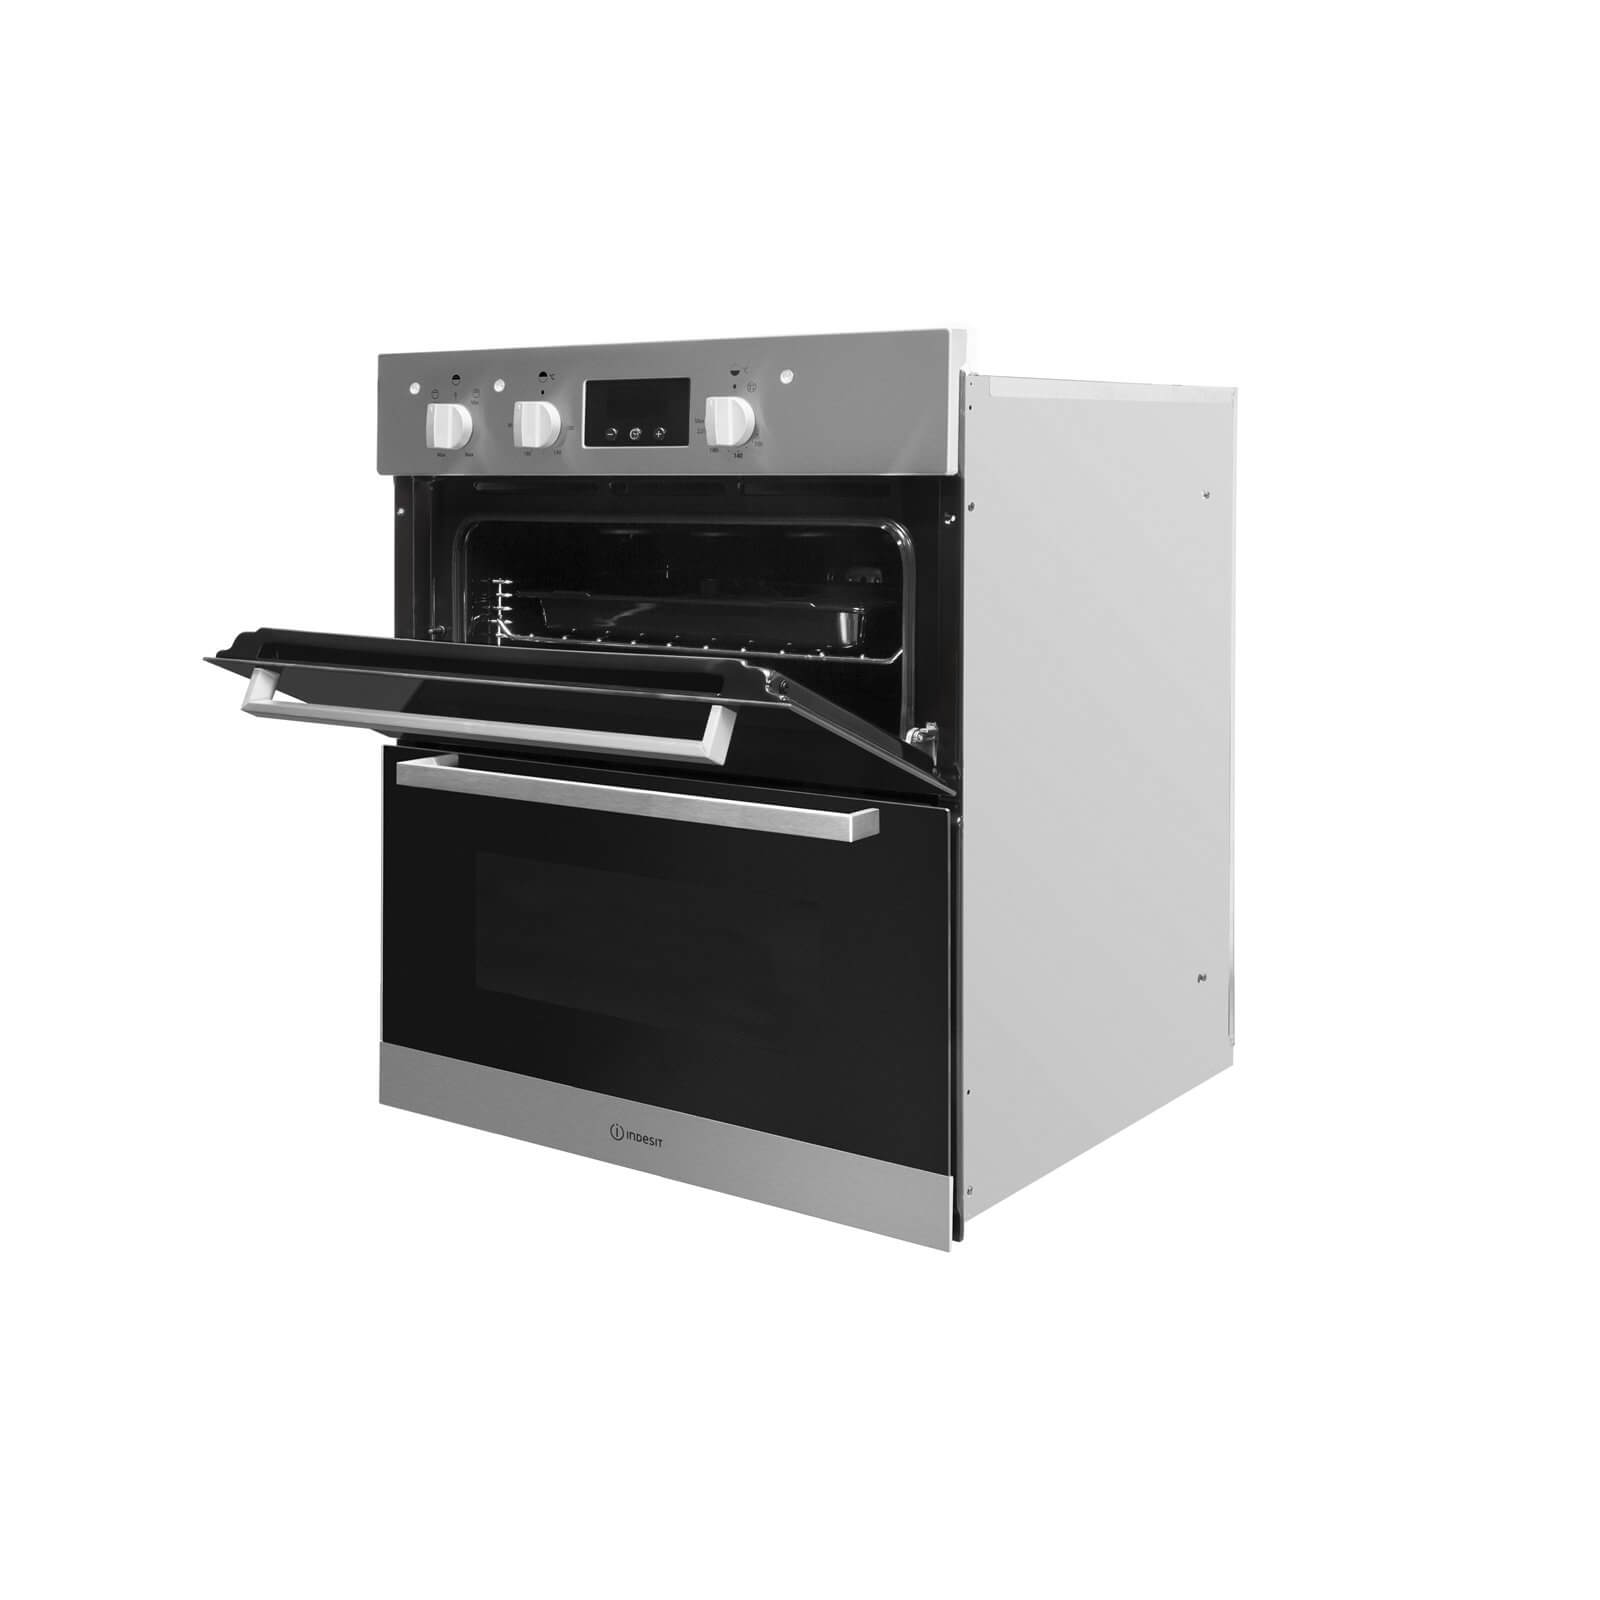 Indesit IDU 6340 IX Built-under Electric Oven - Stainless Steel